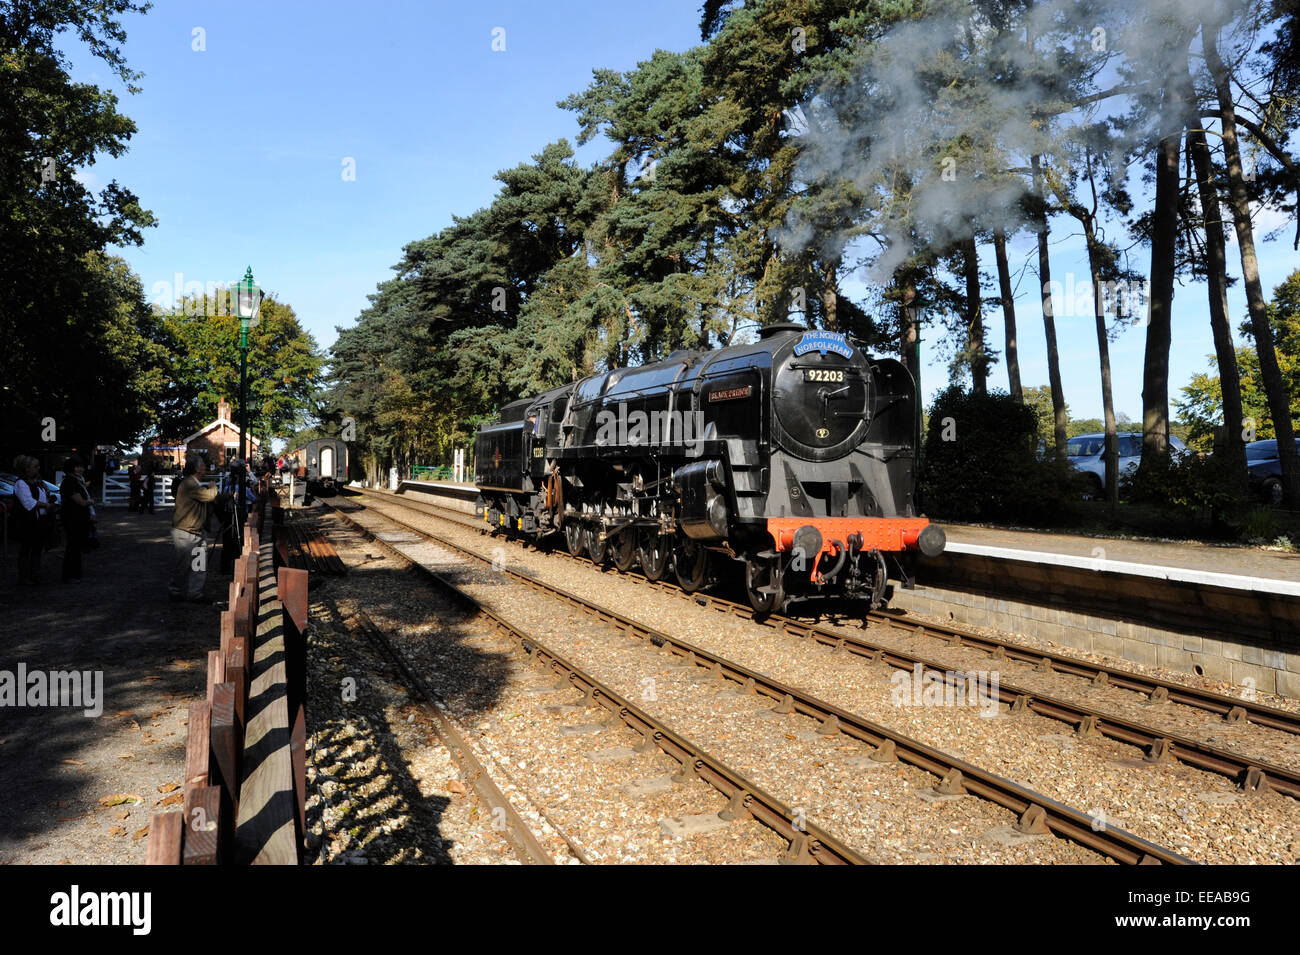 9F 2-10-0 Steam Locomotive number 92203 'Black Prince' runs round its train at Holt station on the North Norfolk Railway between Holt and Sheringham, near Norwich, Norfolk. Animal and Railway Artist David Shepherd restored the Steam Engine to working order Stock Photo